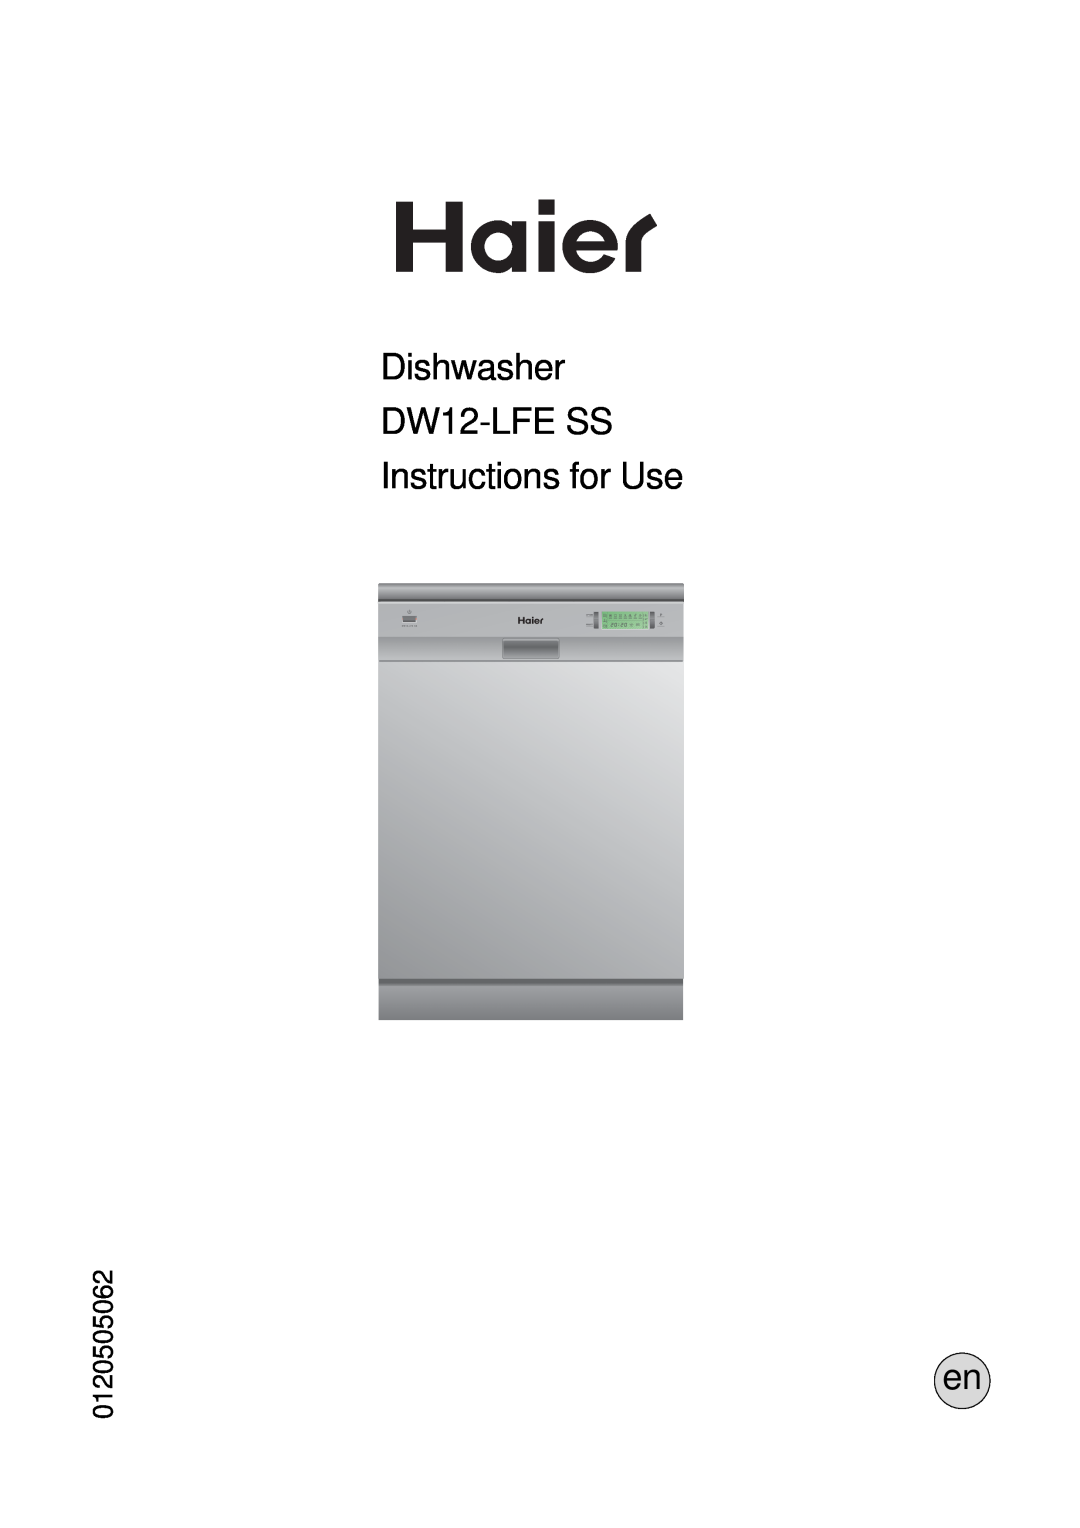 Haier manual Dishwasher DW12-LFE SS Instructions for Use, 0120505062 